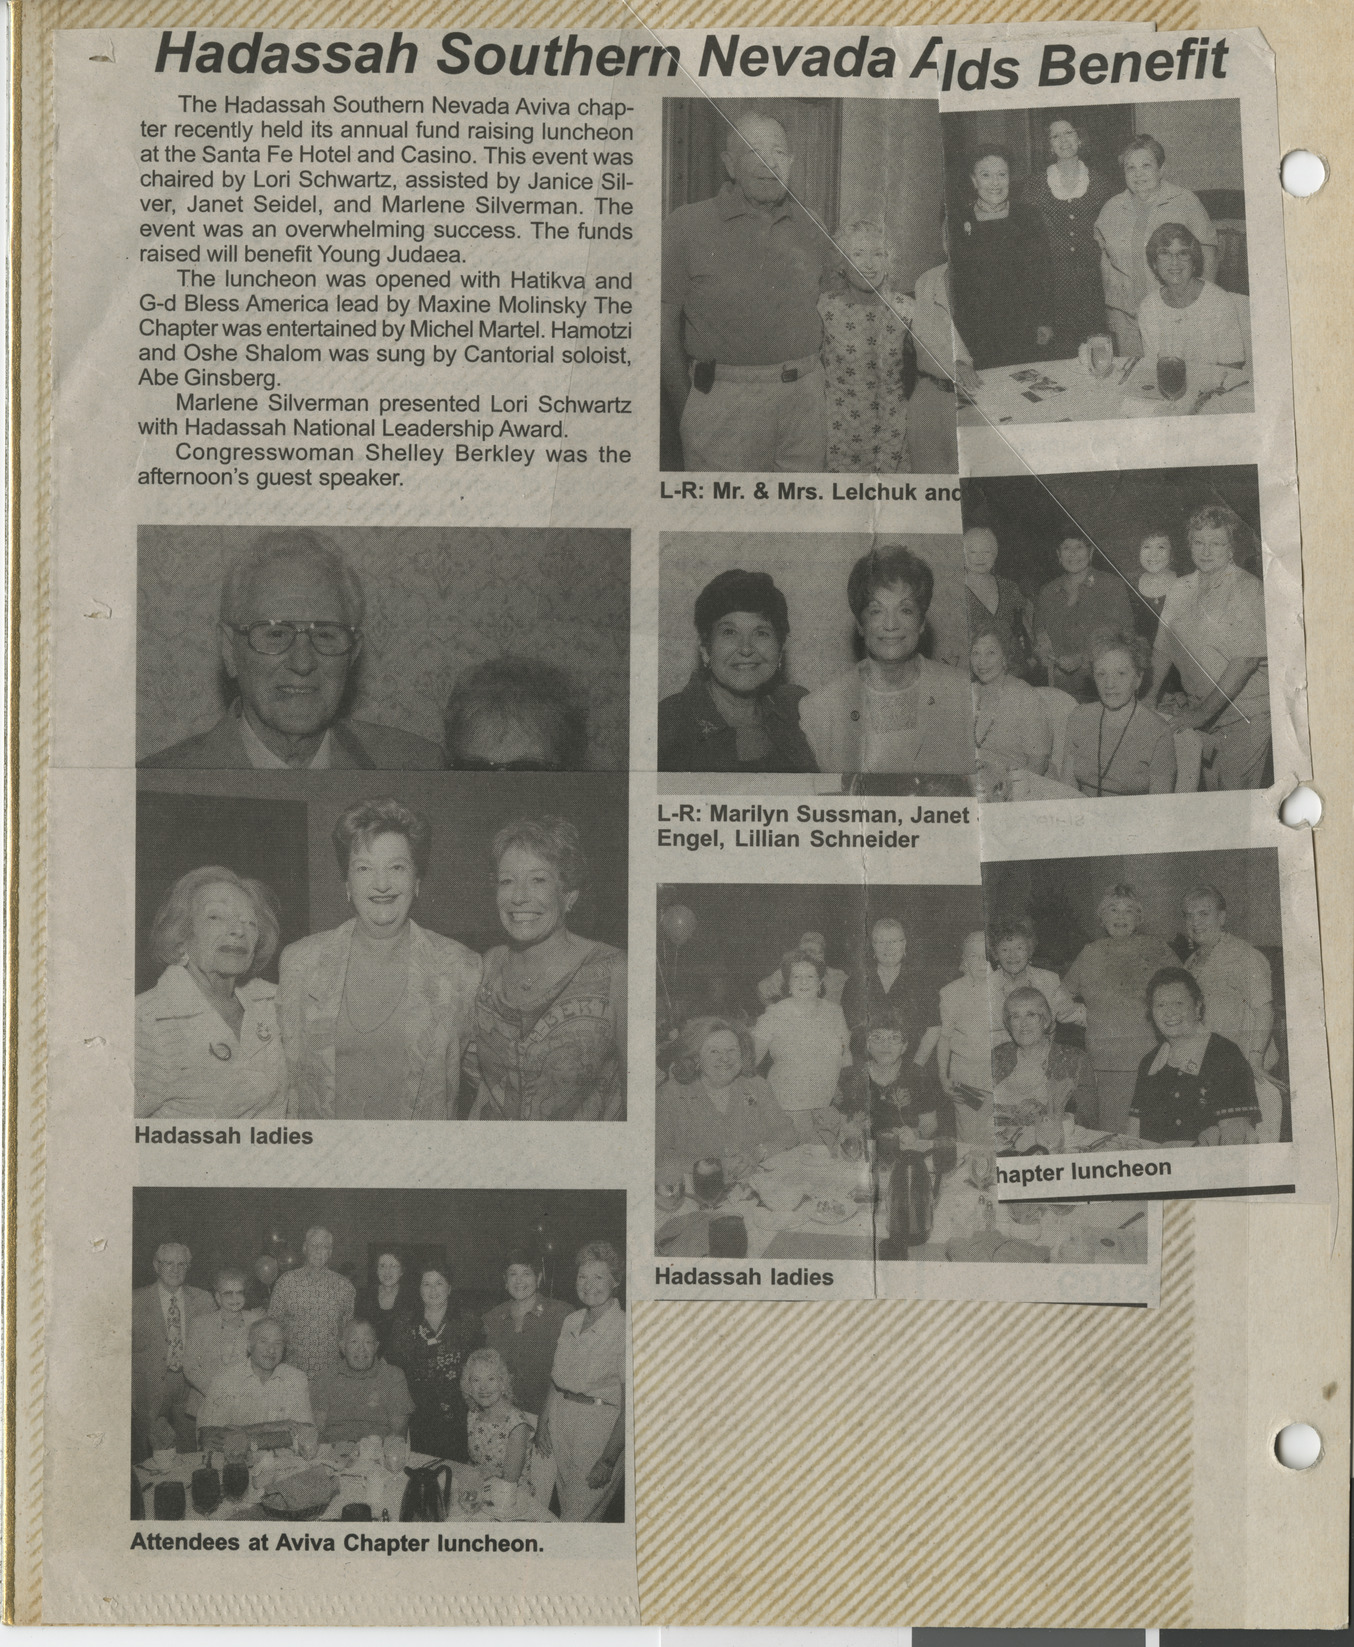 Newspaper clipping for Hadassah Southern Nevada Aviva chapter event, publication and date unknown